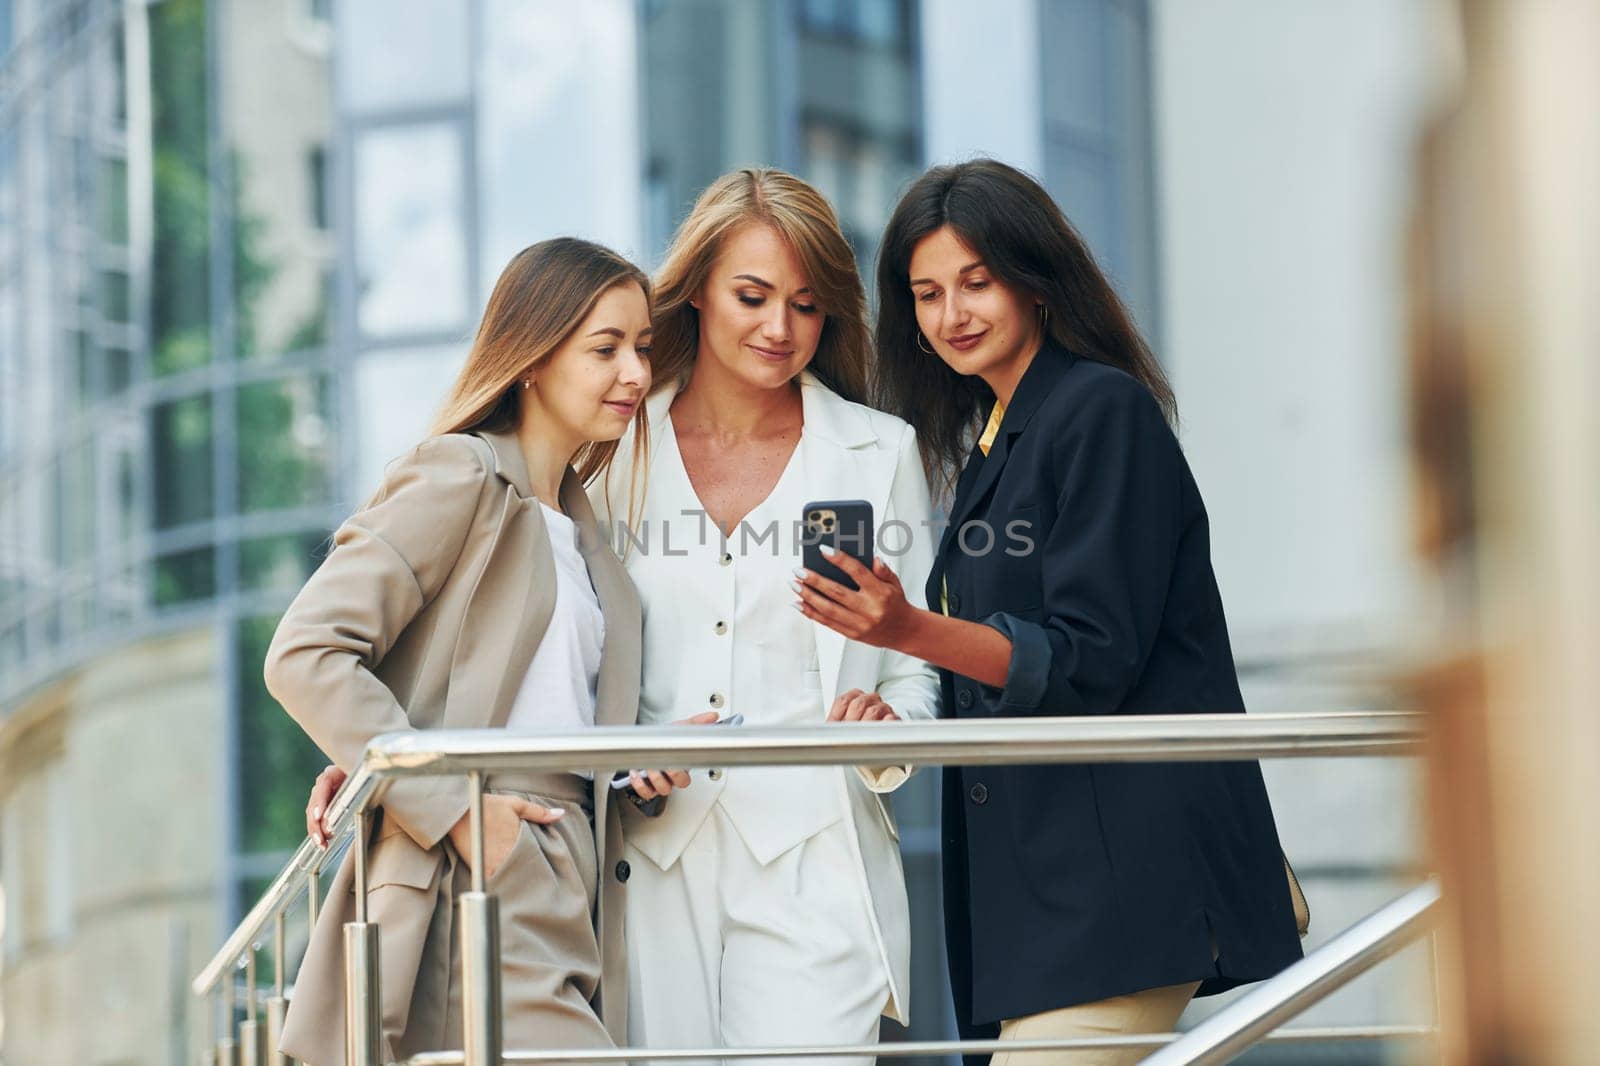 Using phone. Women in formal wear is outdoors in the city together.